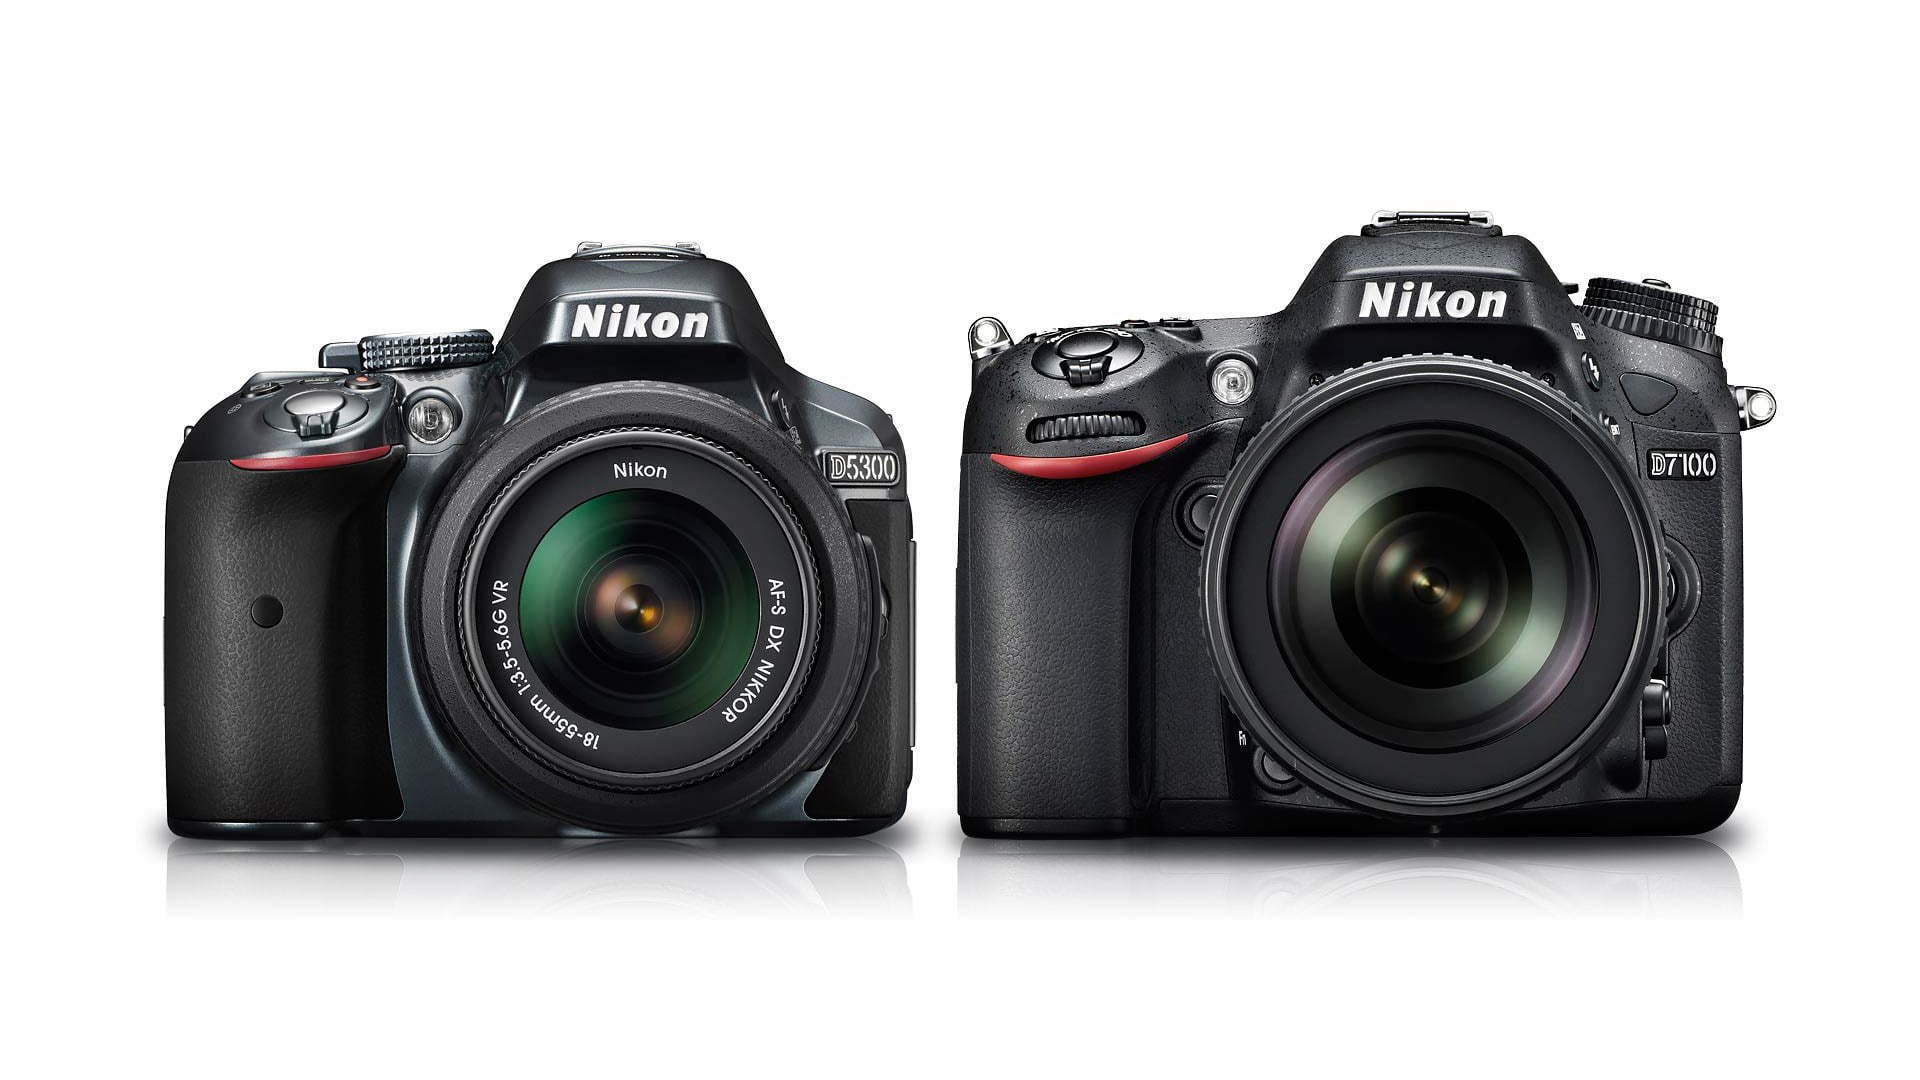 Nikon D5300 vs D7100 : Which Should You Buy? - Light And Matter